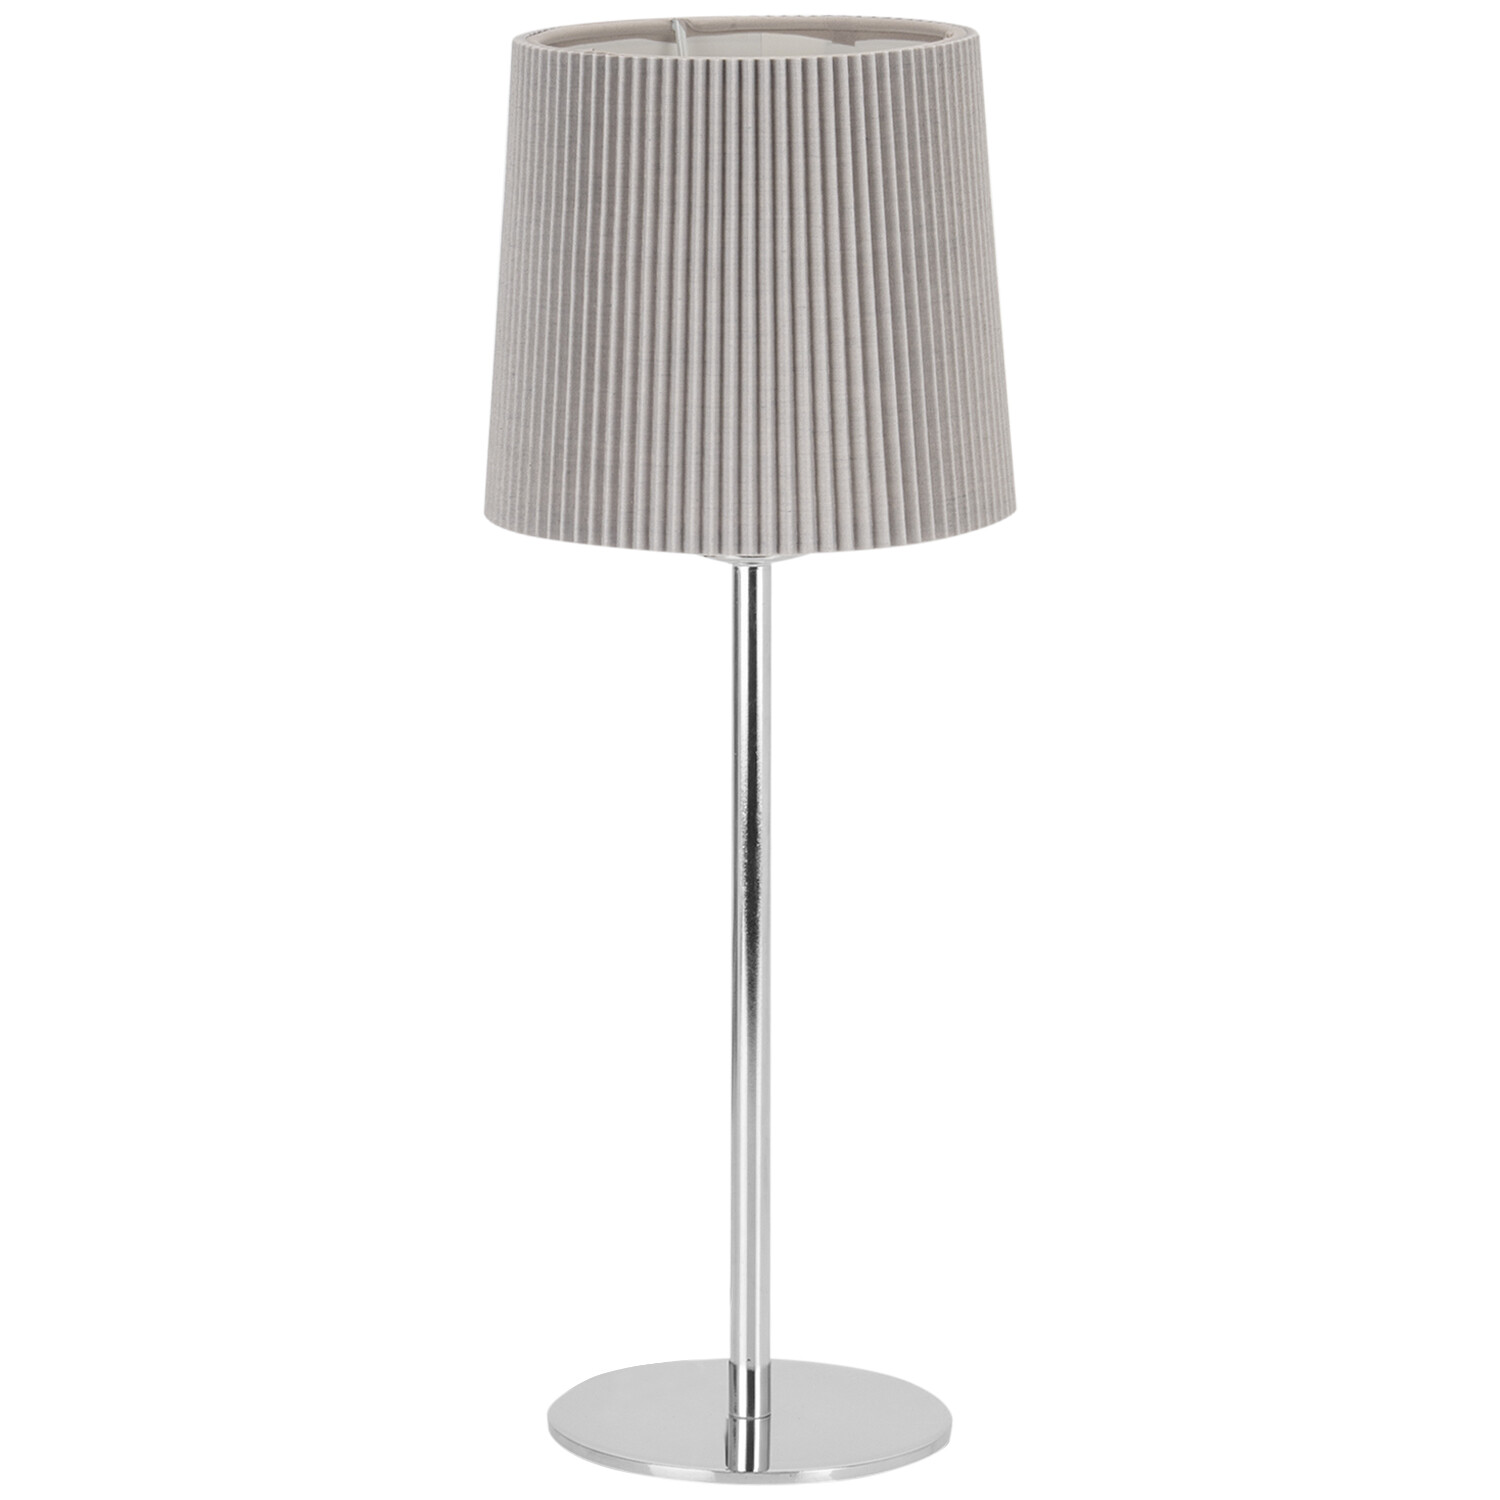 Single Hana Table Lamp in Assorted styles Image 1